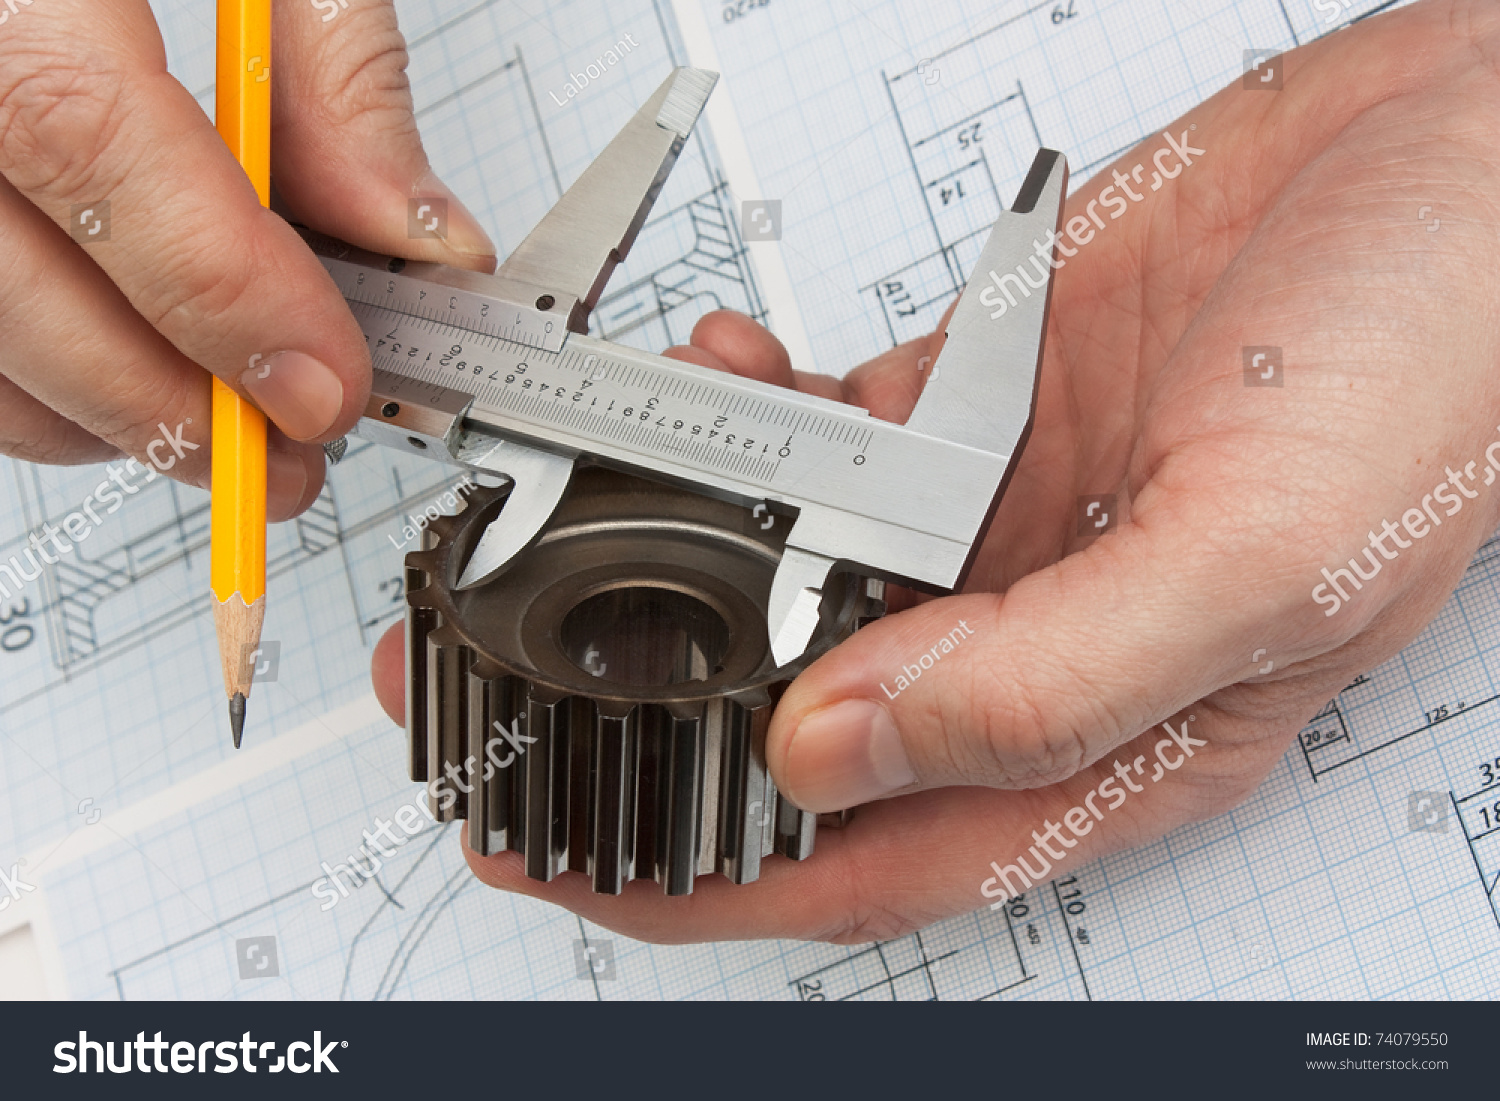 technical drawing and tools in hand #74079550